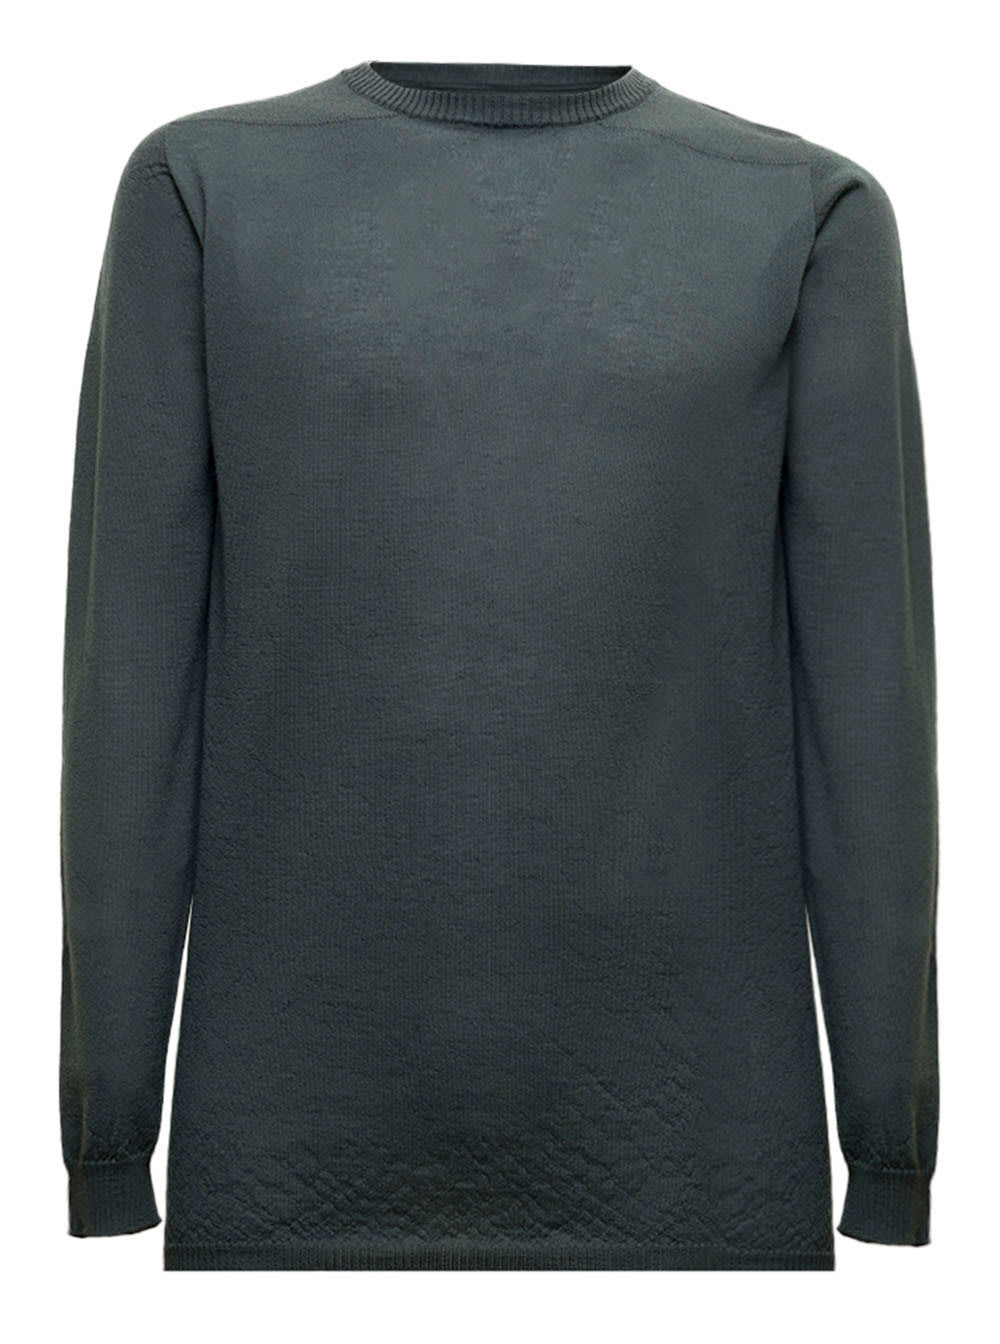 Rick Owens Mens Green Cashmere Long-sleeved Sweater